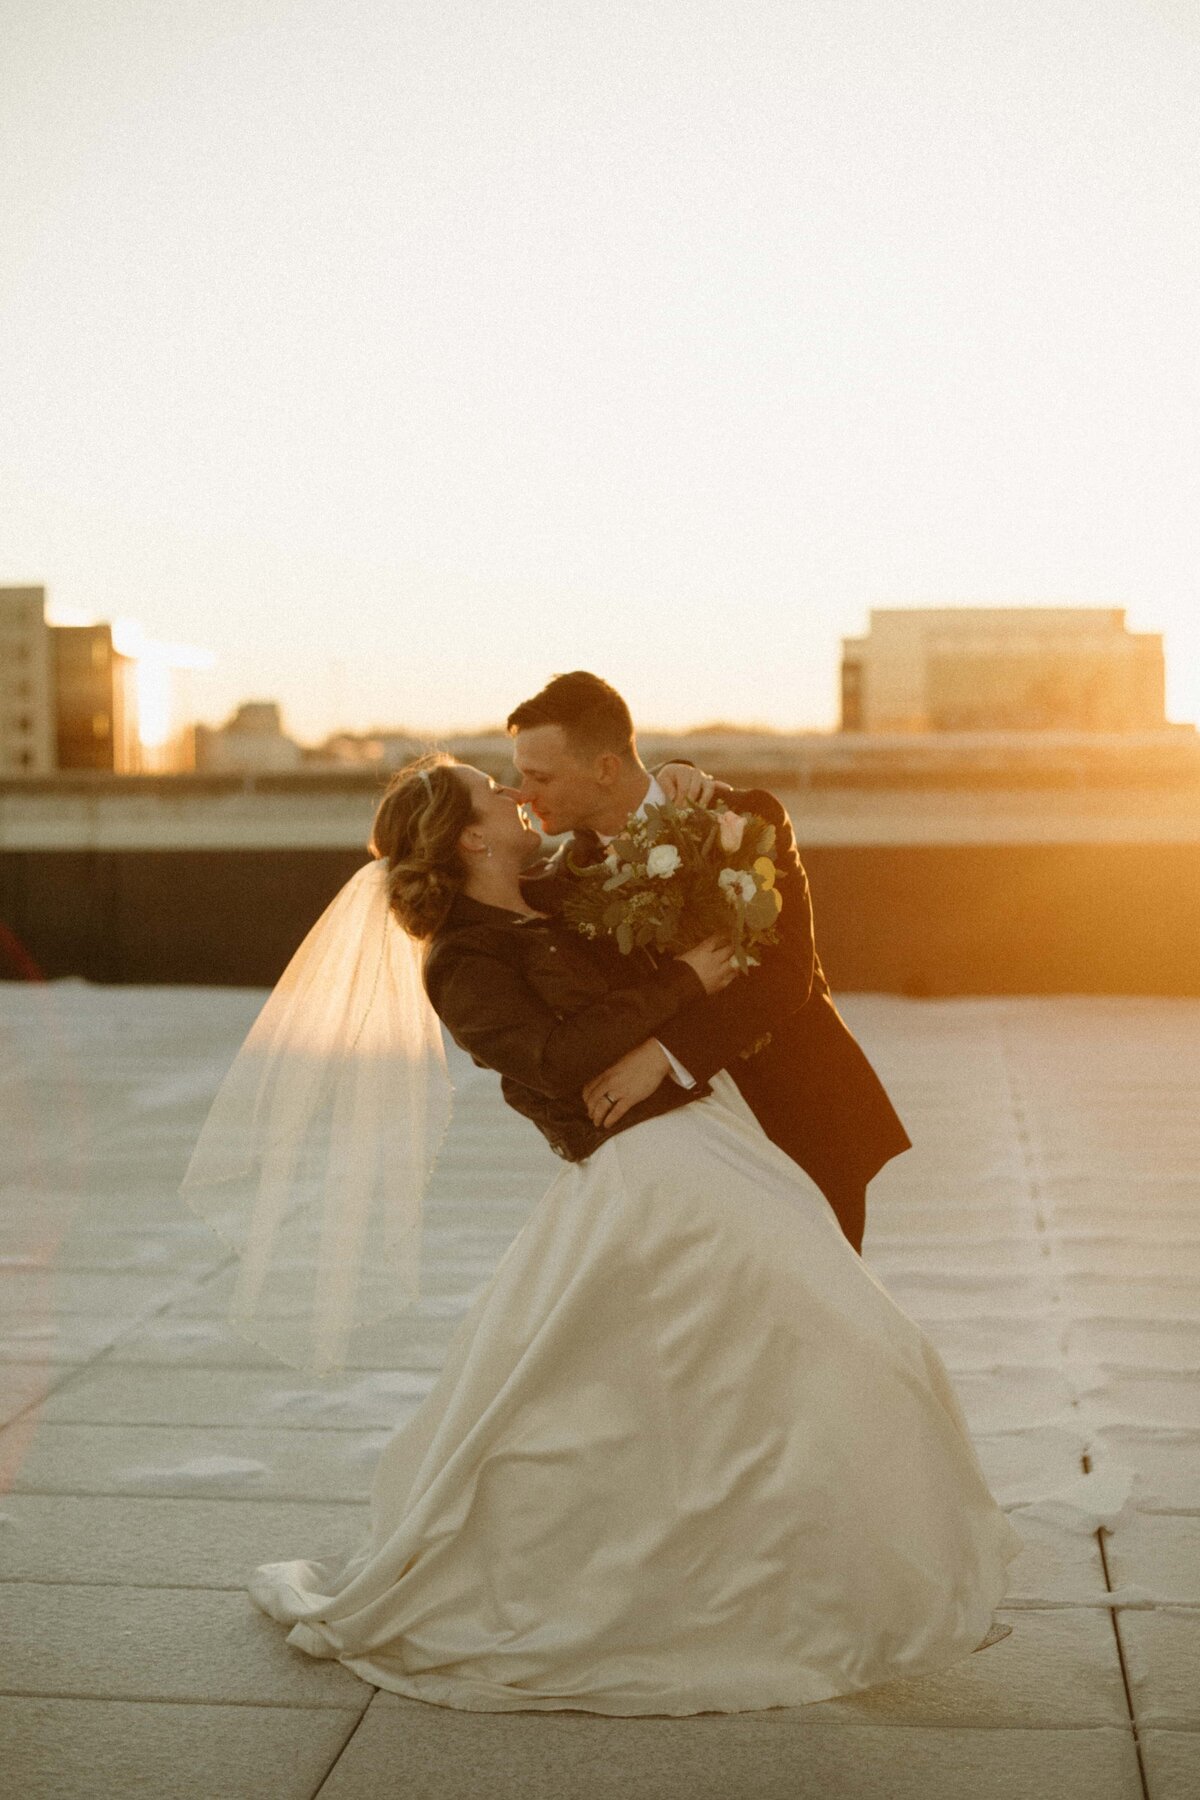 A bride and groom embrace and kiss on a rooftop at sunset in Davenport, with soft sunlight illuminating them and the city skyline in the background.